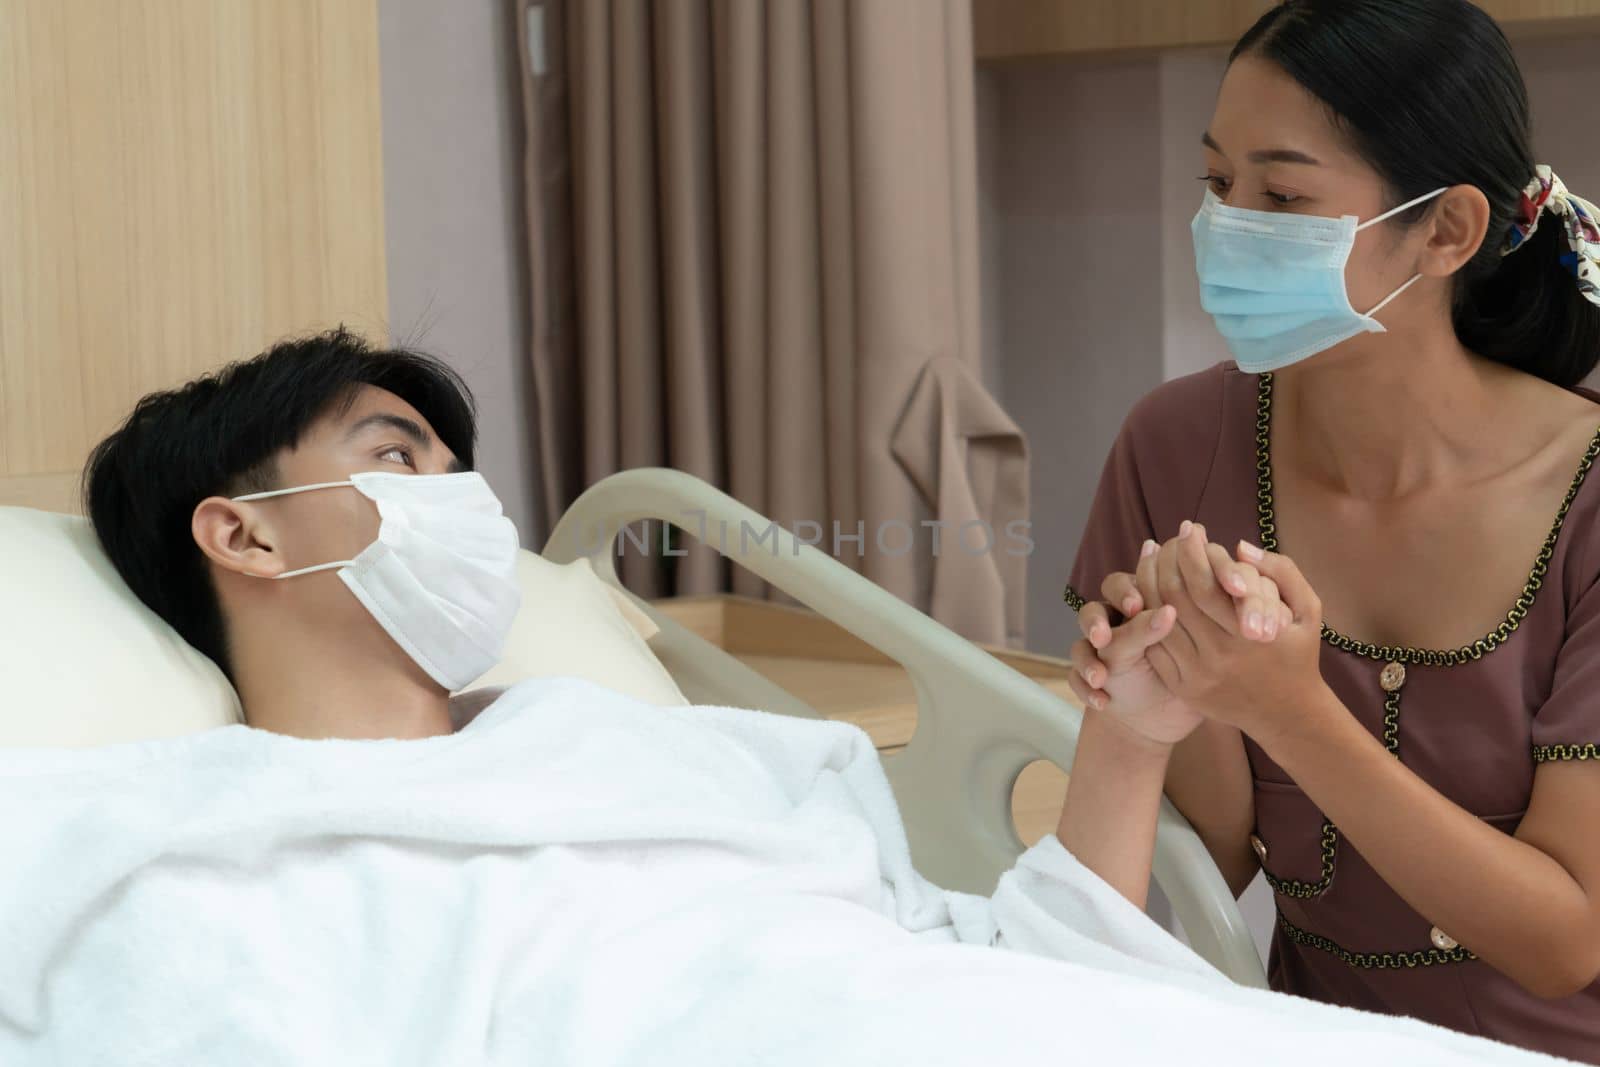 Young patient with attentive visitor and family holding hands in hospital sterile recovery room. The concept of family support for patients receiving hospital care. In-ward medical care and healthcare